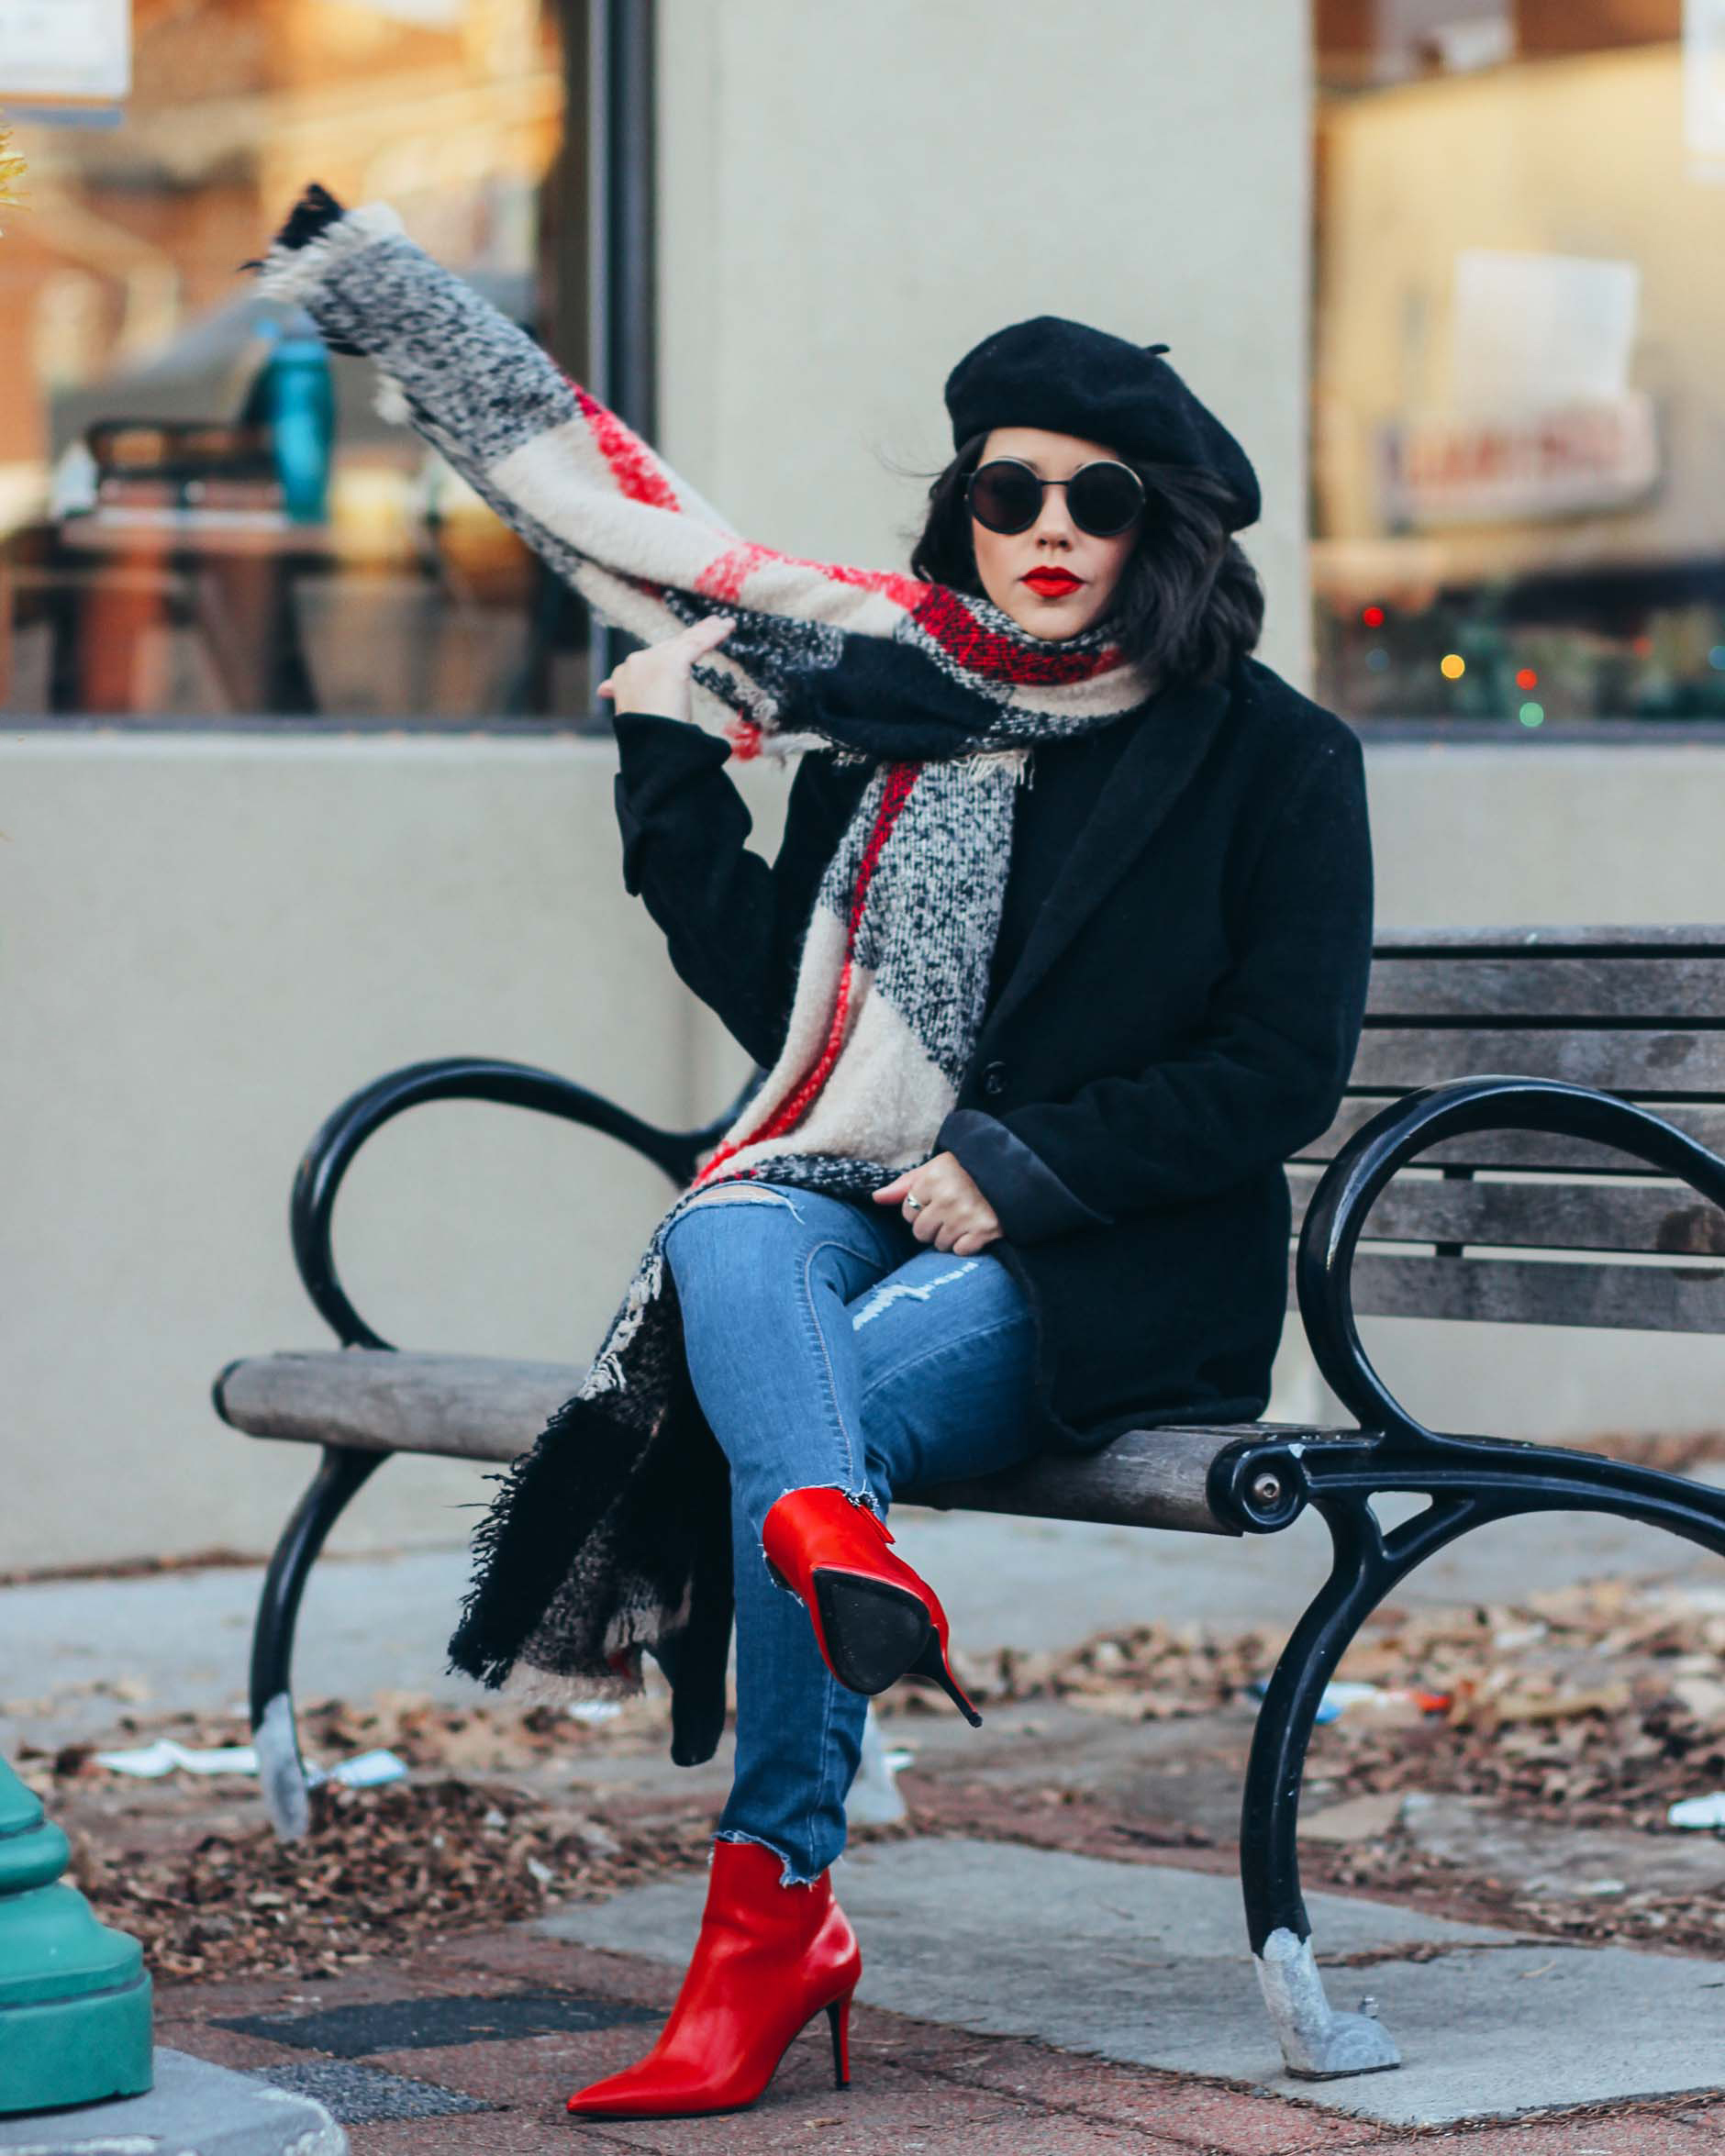 naty michele wearing a beret, red boots and plaid scarf